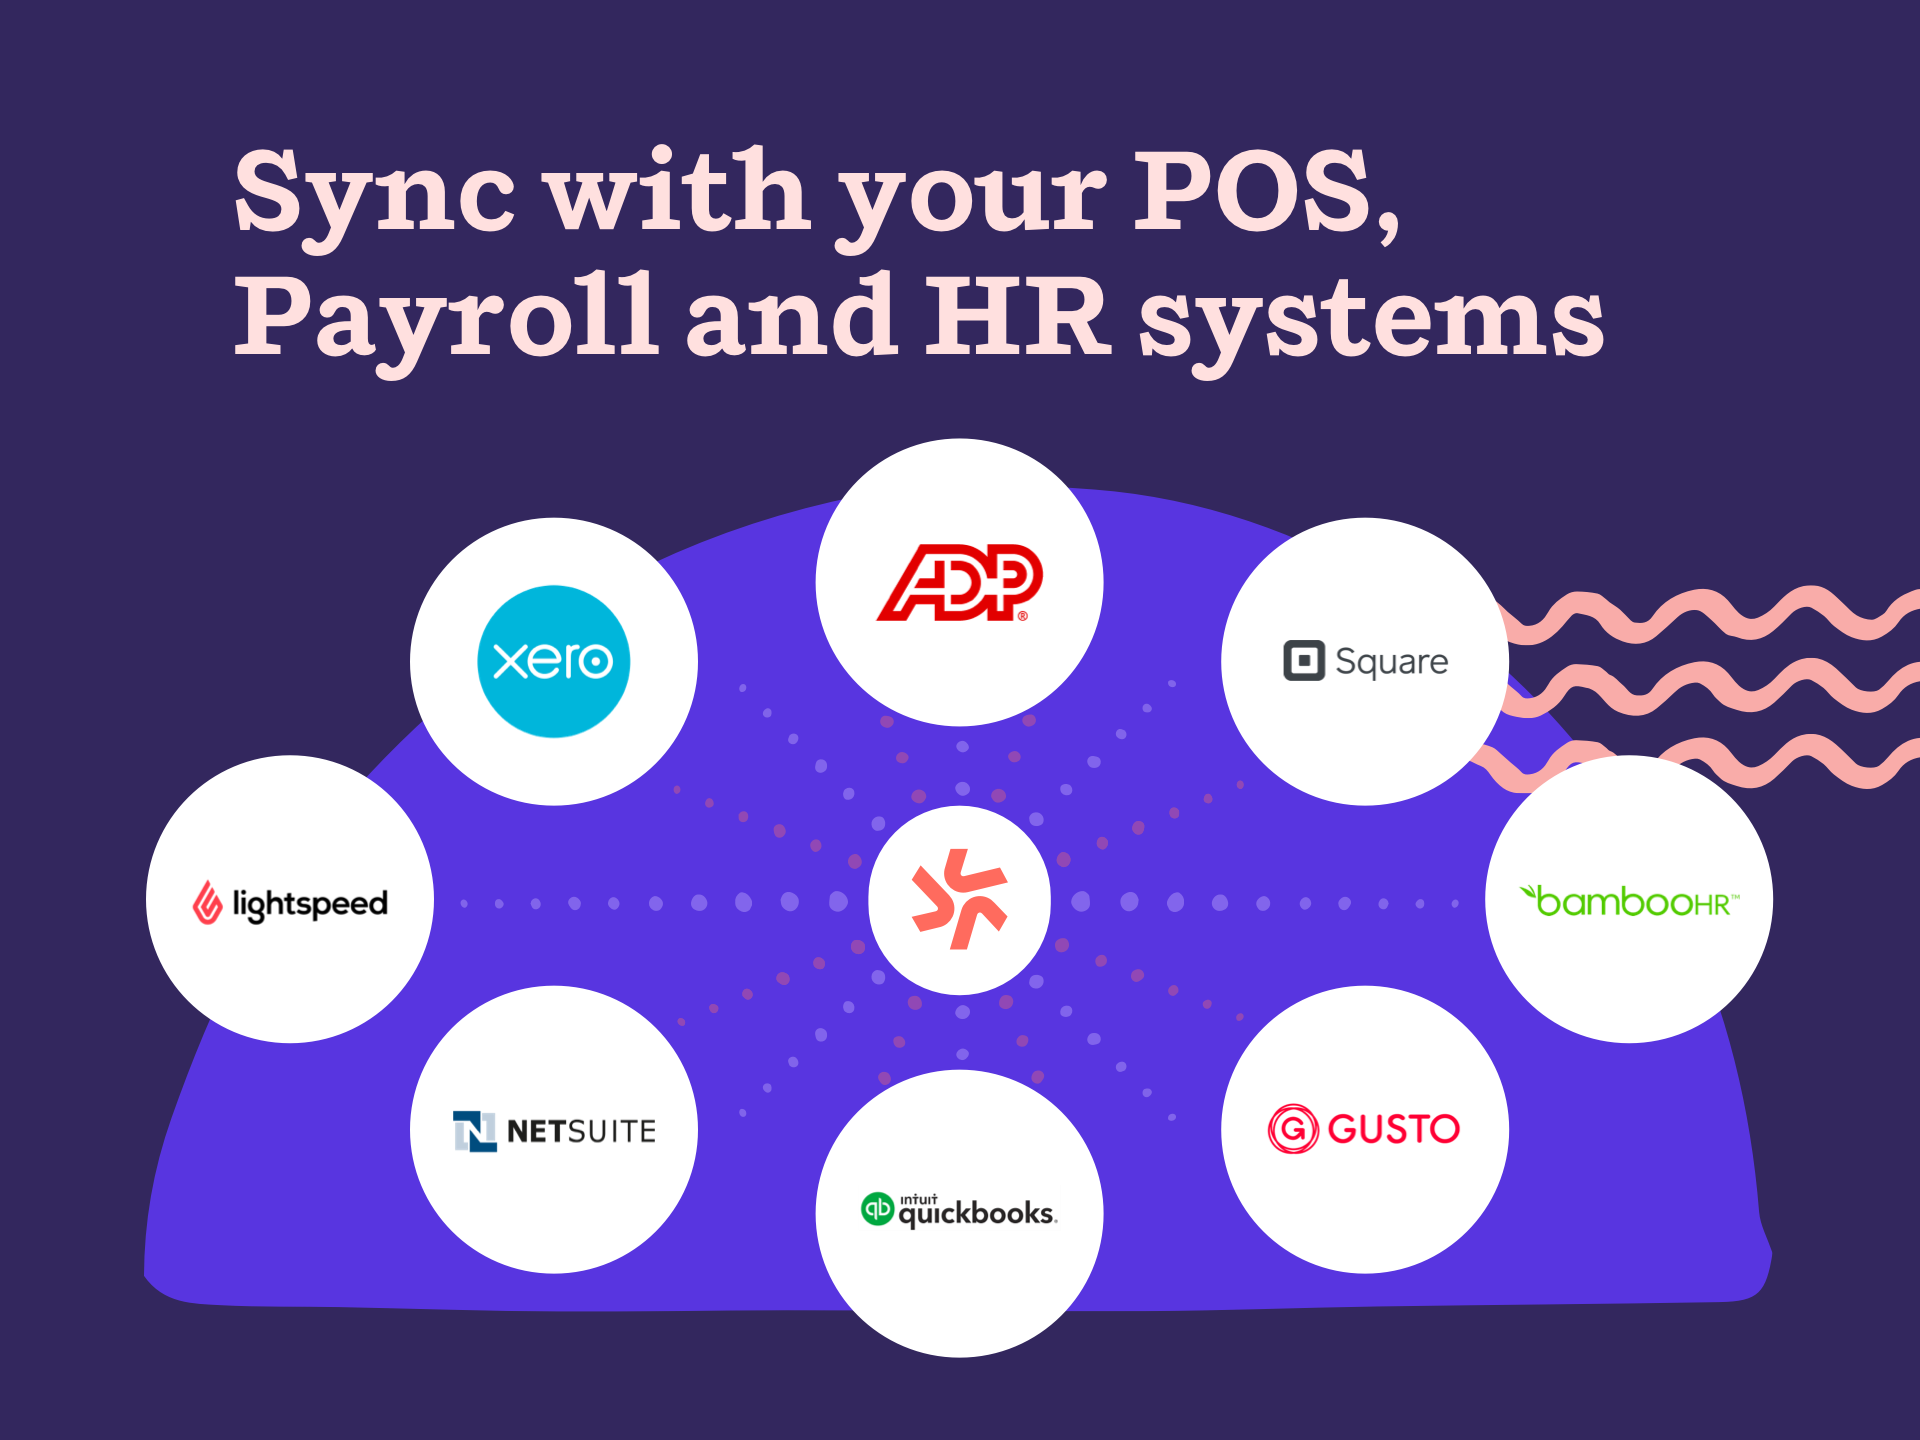 Build a connected business: Deputy integrates with your Point of Sale, HR & Payroll Providers.